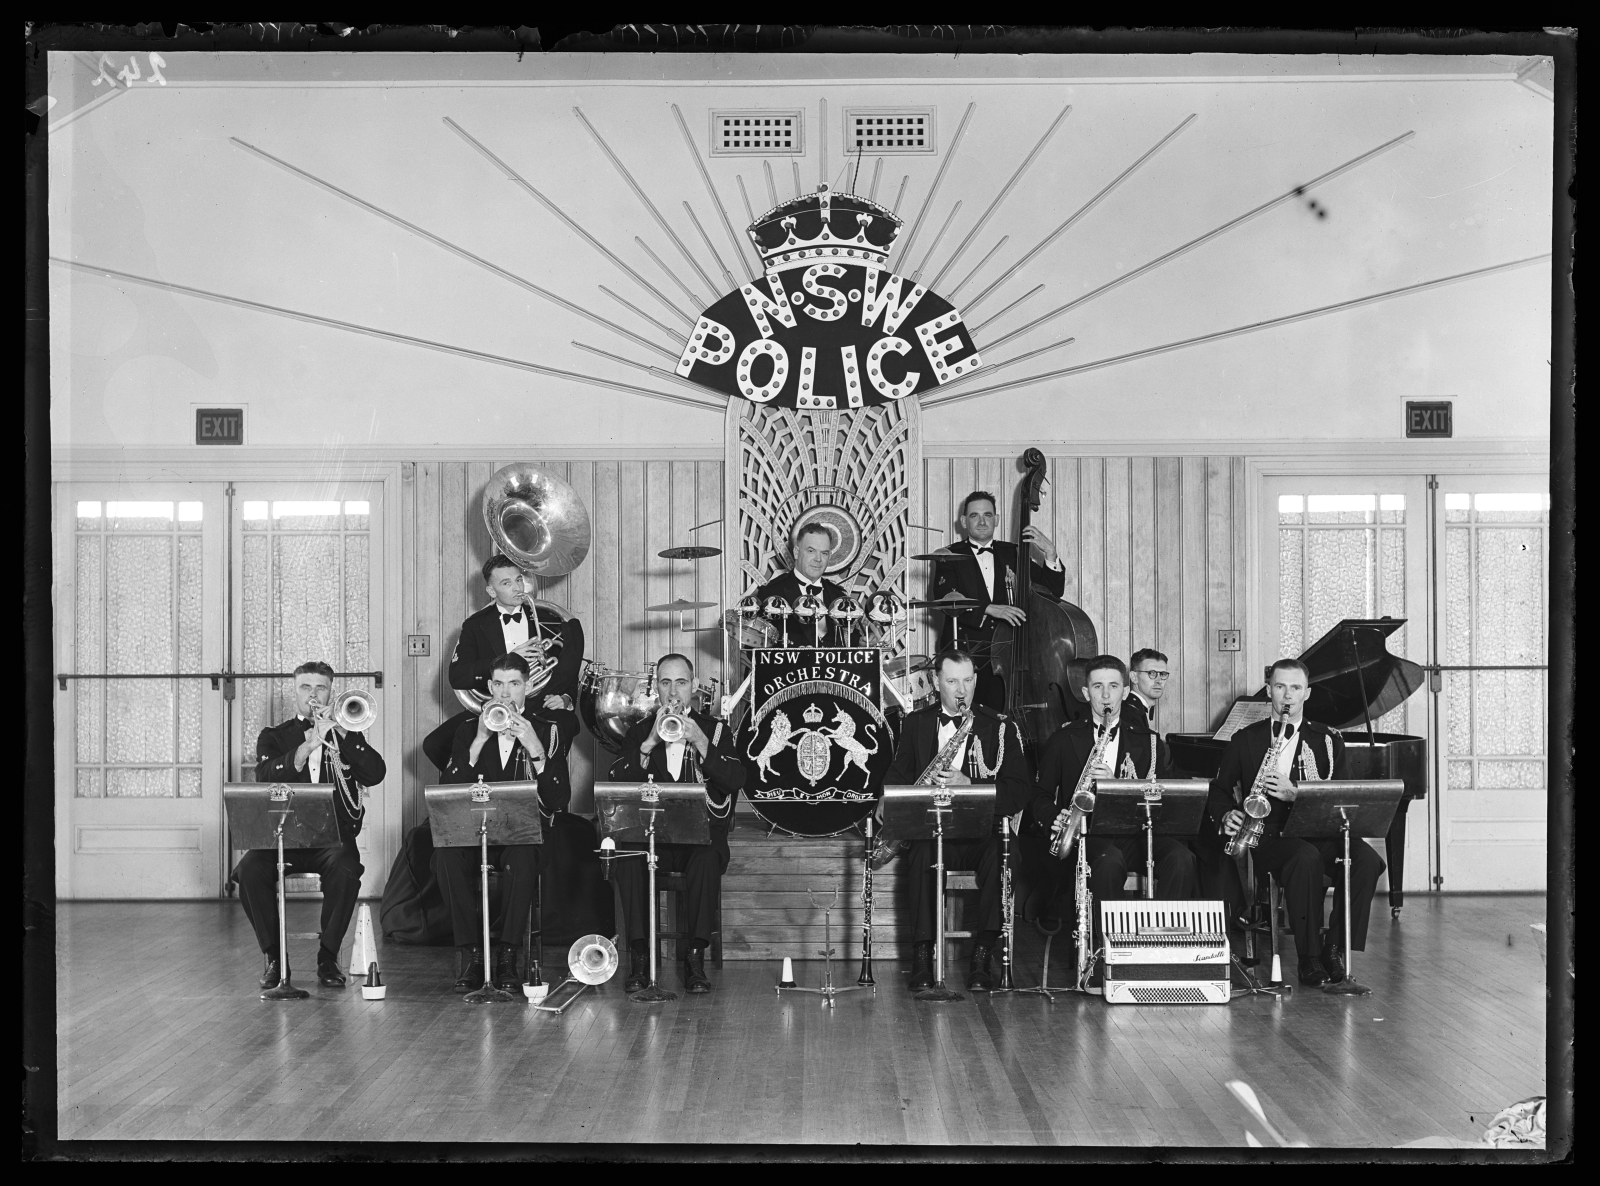 NSW Police Orchestra performing indoors, c 1930s